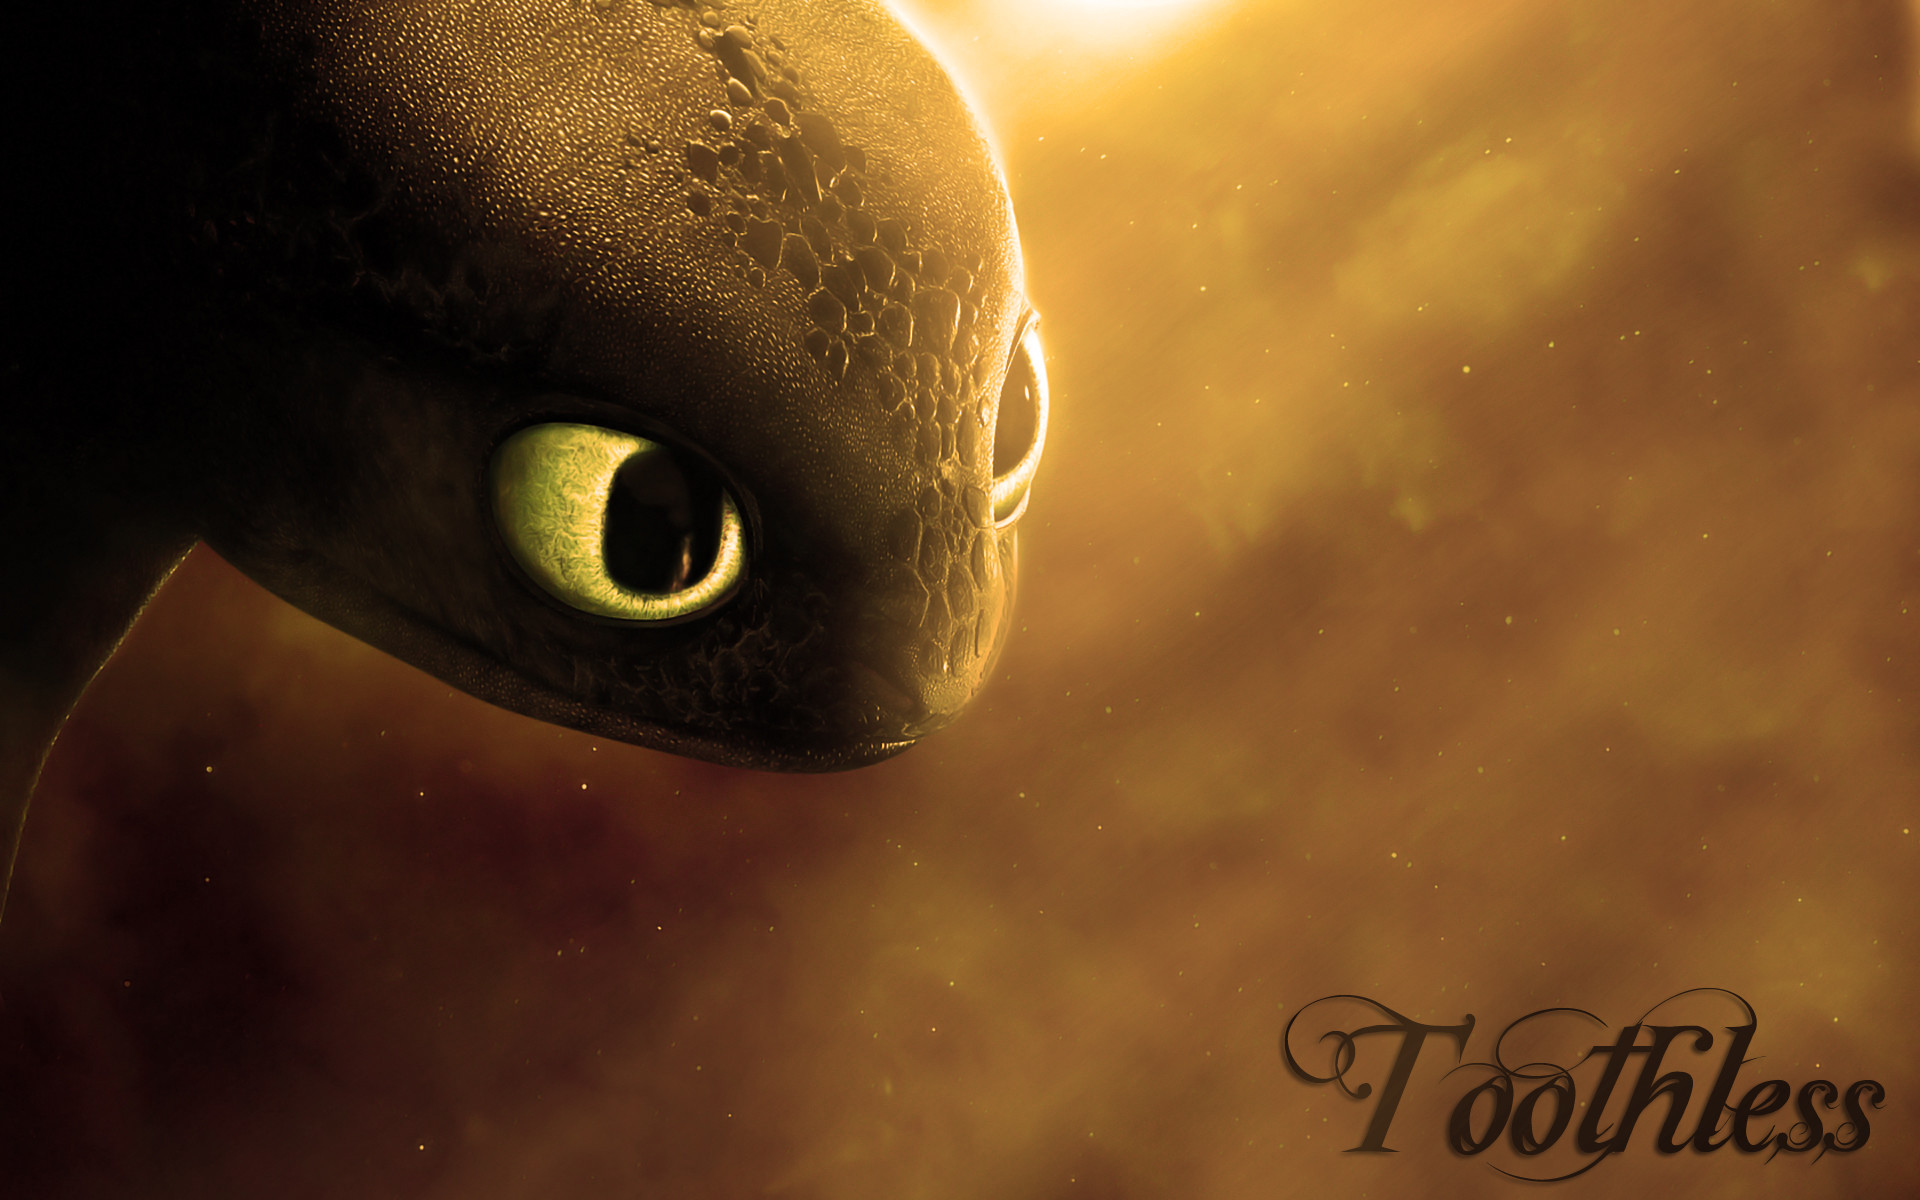 Train Your Dragon Toothless Wallpaper 1920x1200